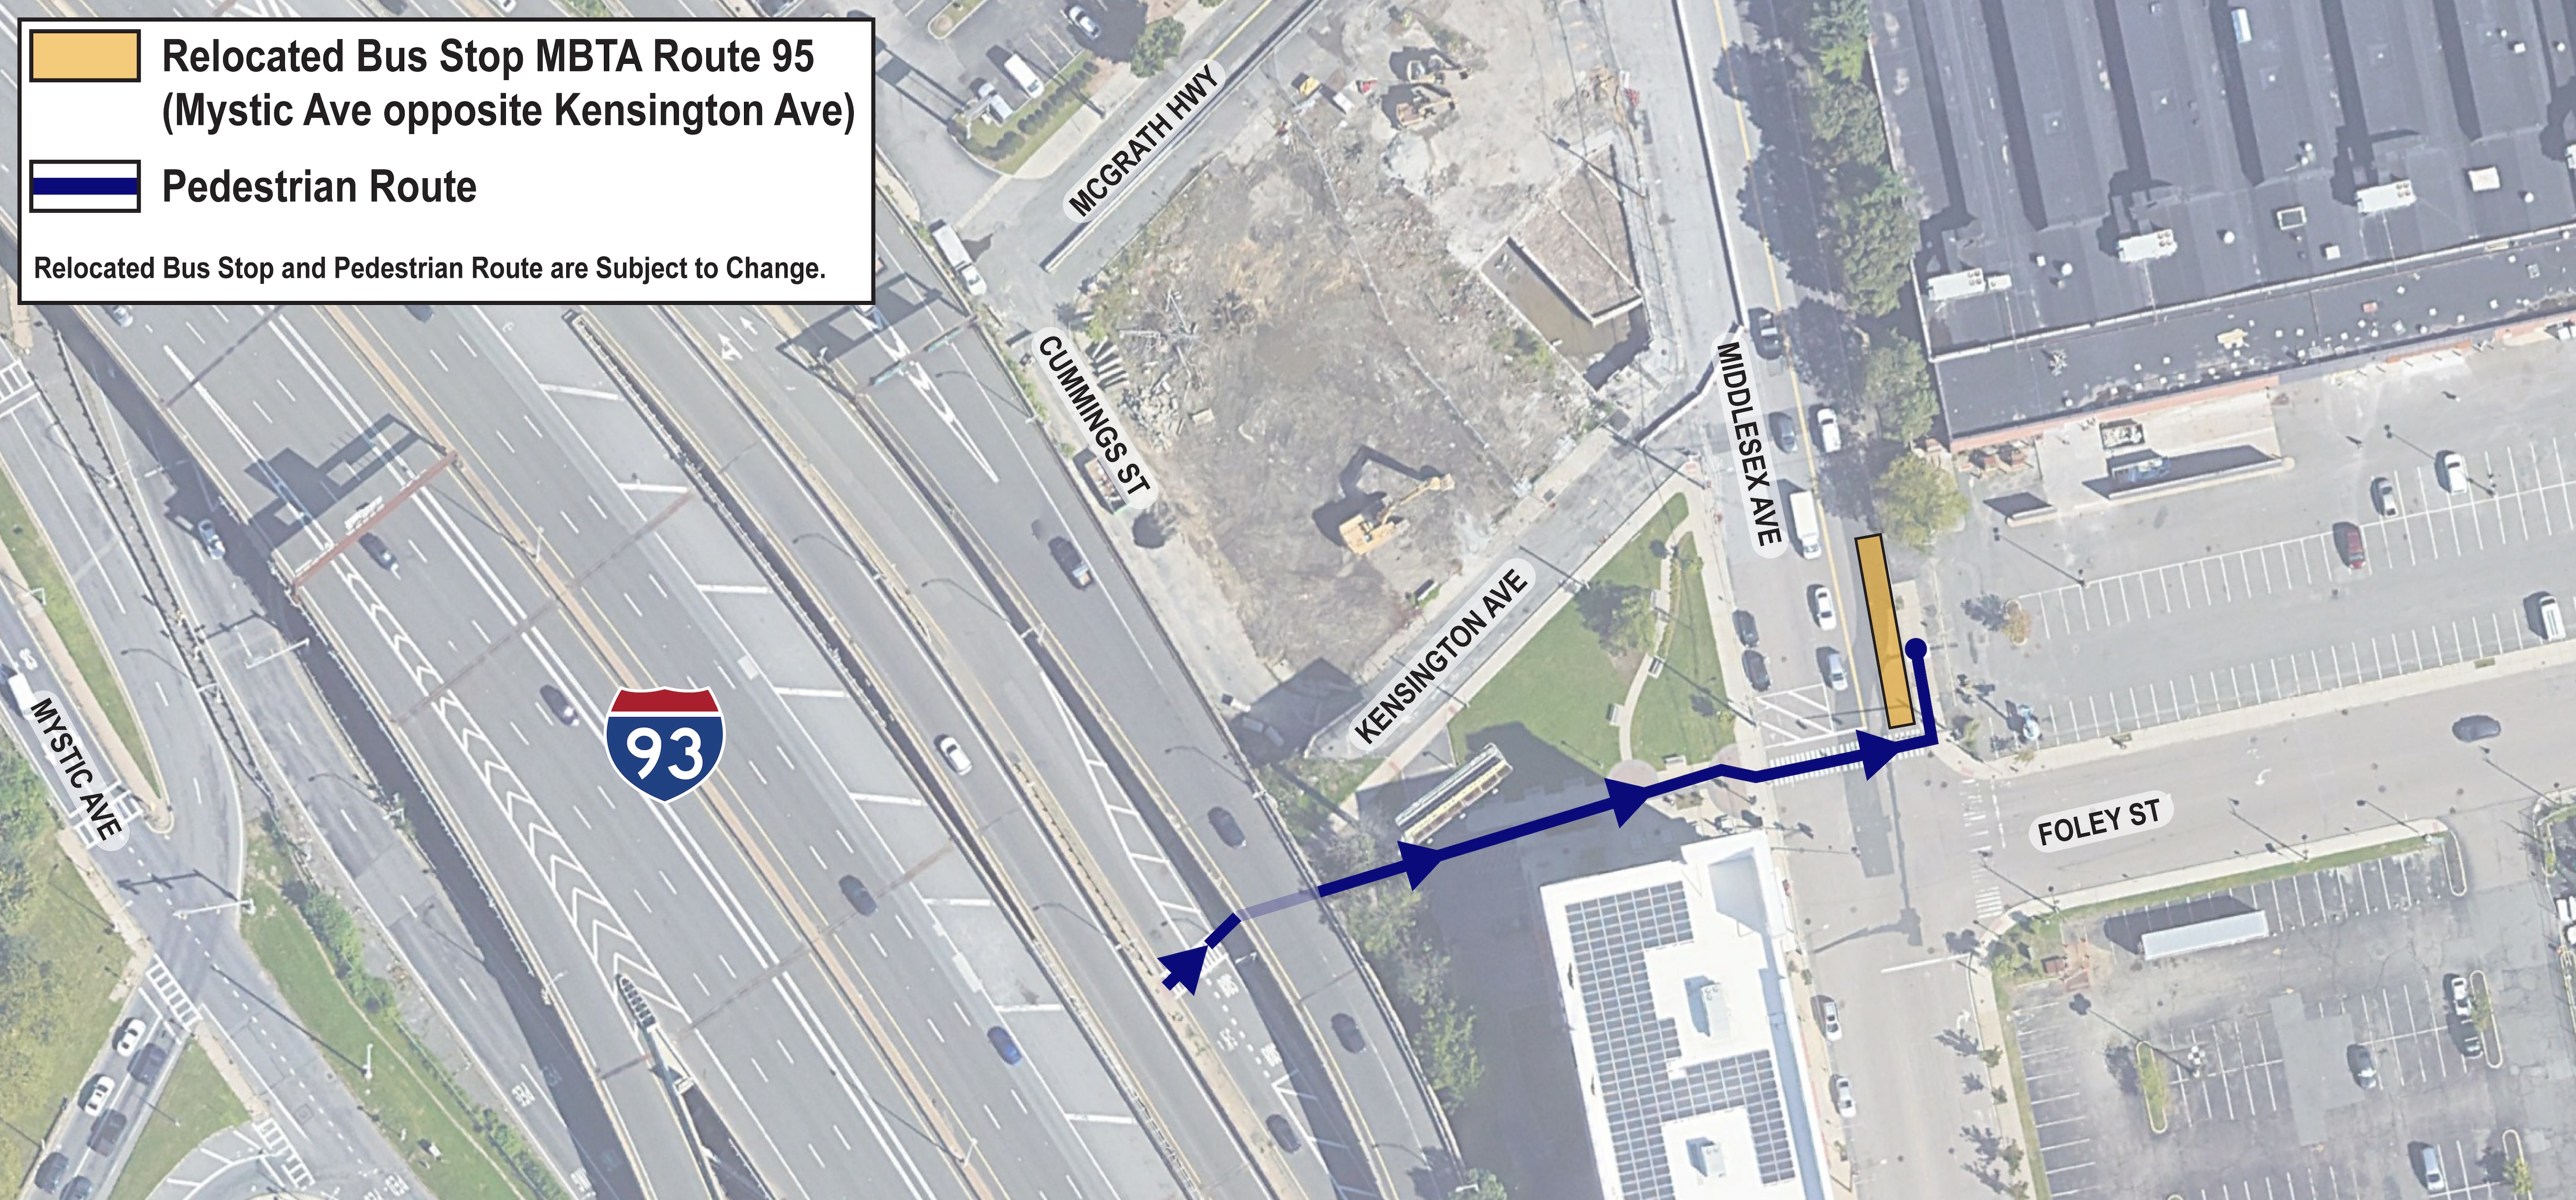 An aerial graphic showing the project location. The detour is depicted by an arrow going up Kensington Avenue and onto Middlesex Avenue. The key reads, “Relocated bus stop MBTA Route 95 (Mystic Ave opposite Kensington Ave), Pedestrian Route, and Relocated Bus Stop and Pedestrian Route Subject to Change.